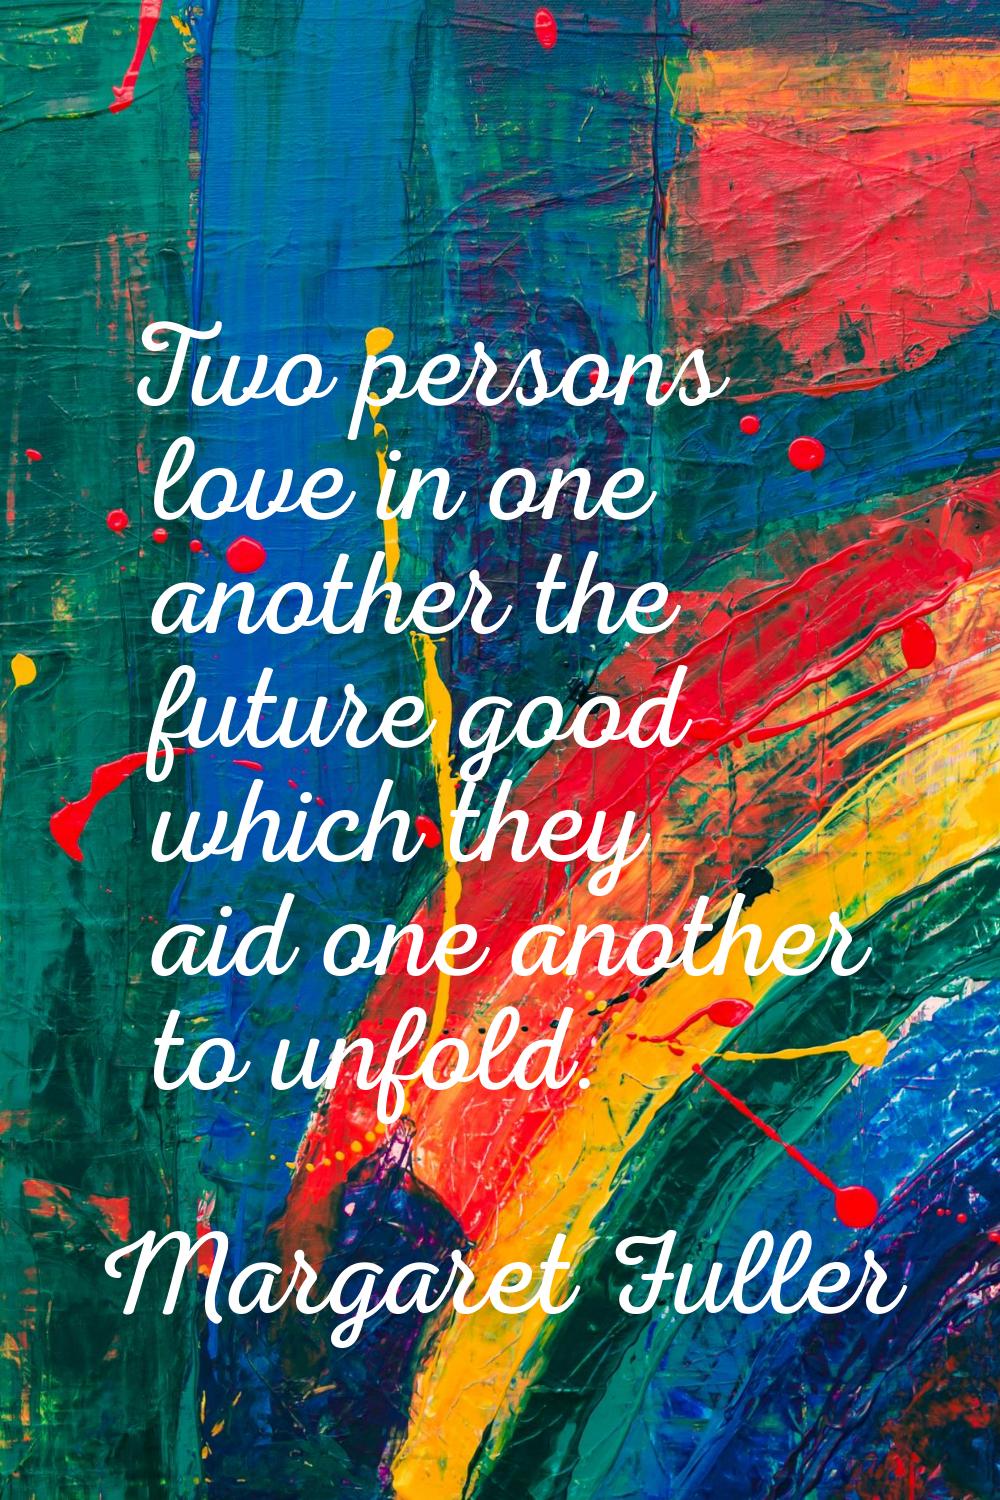 Two persons love in one another the future good which they aid one another to unfold.